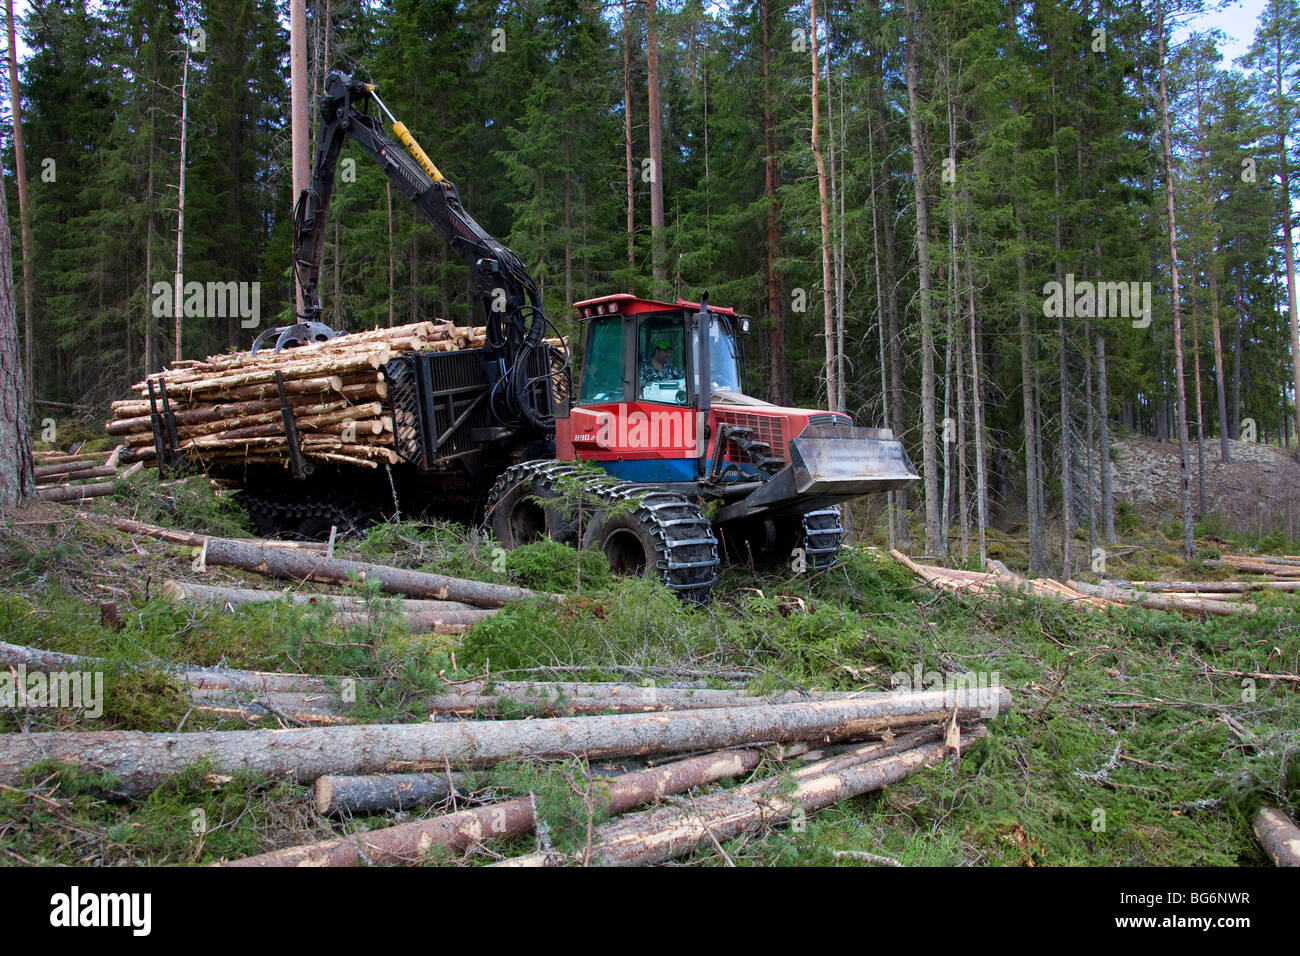 Logging industry showing timber / trees being loaded on forestry machinery / Timberjack harvester in pine forest Stock Photo